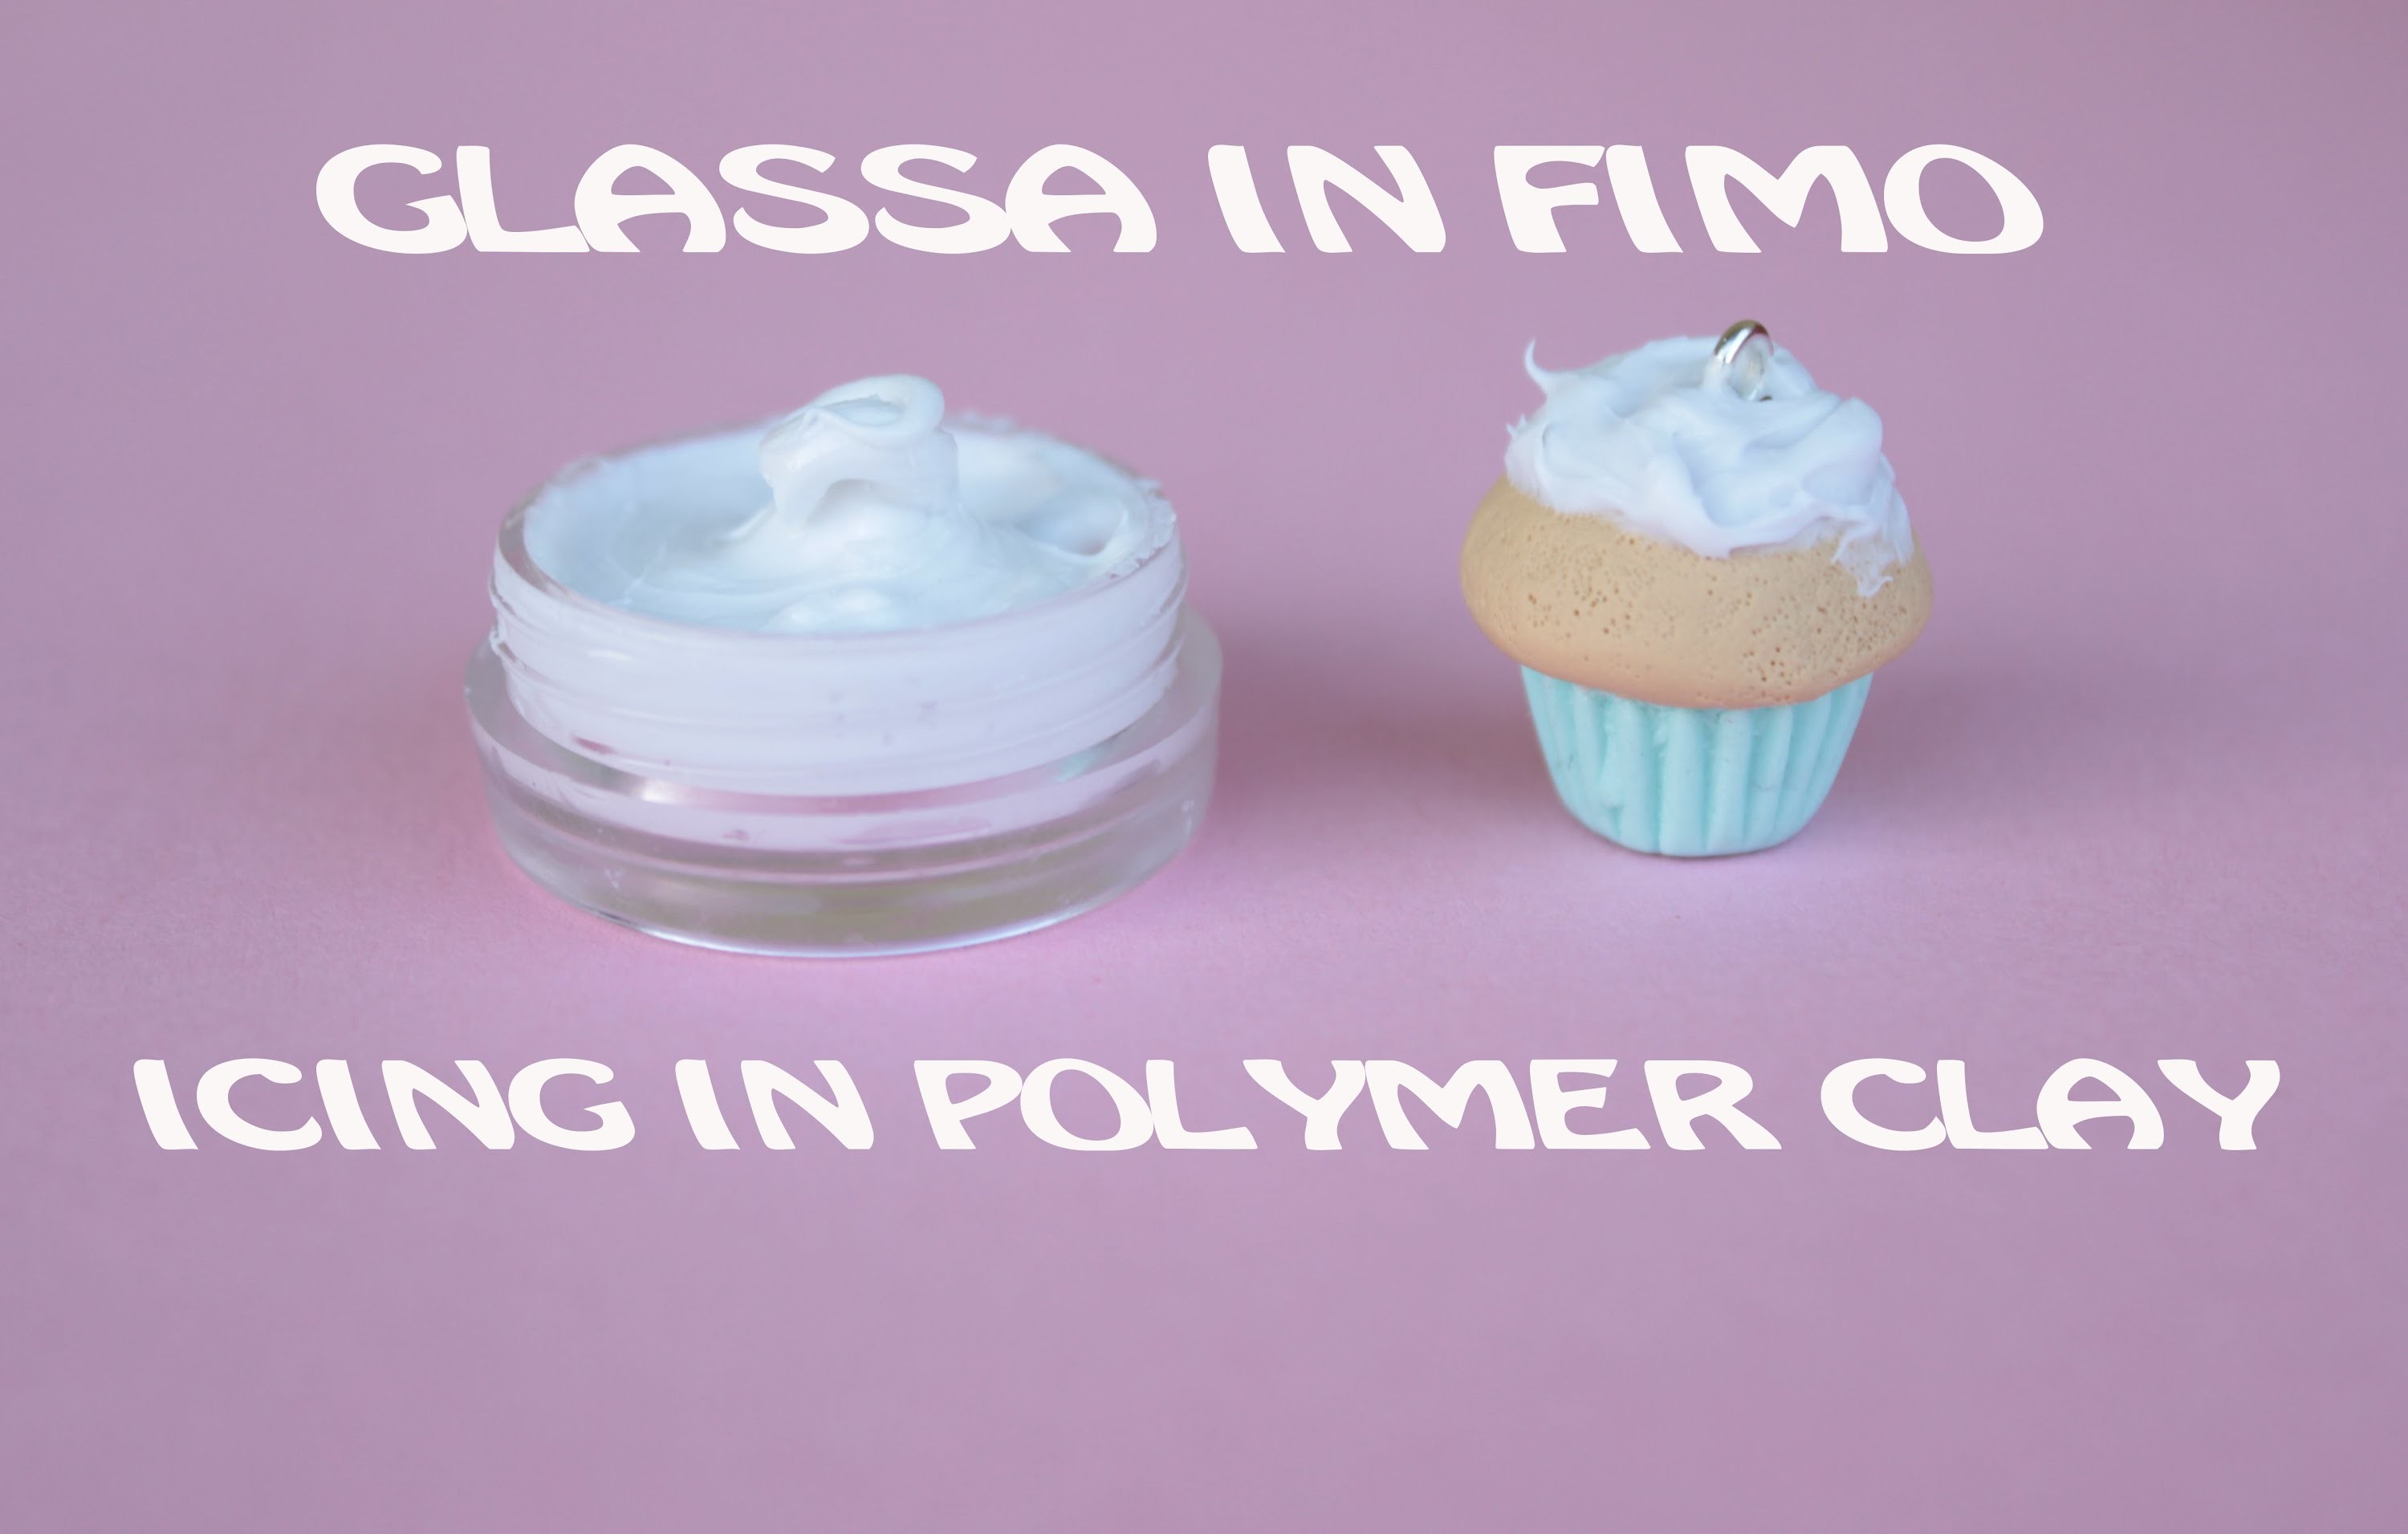 Glassa in Fimo | Icing in Polymer Clay #1